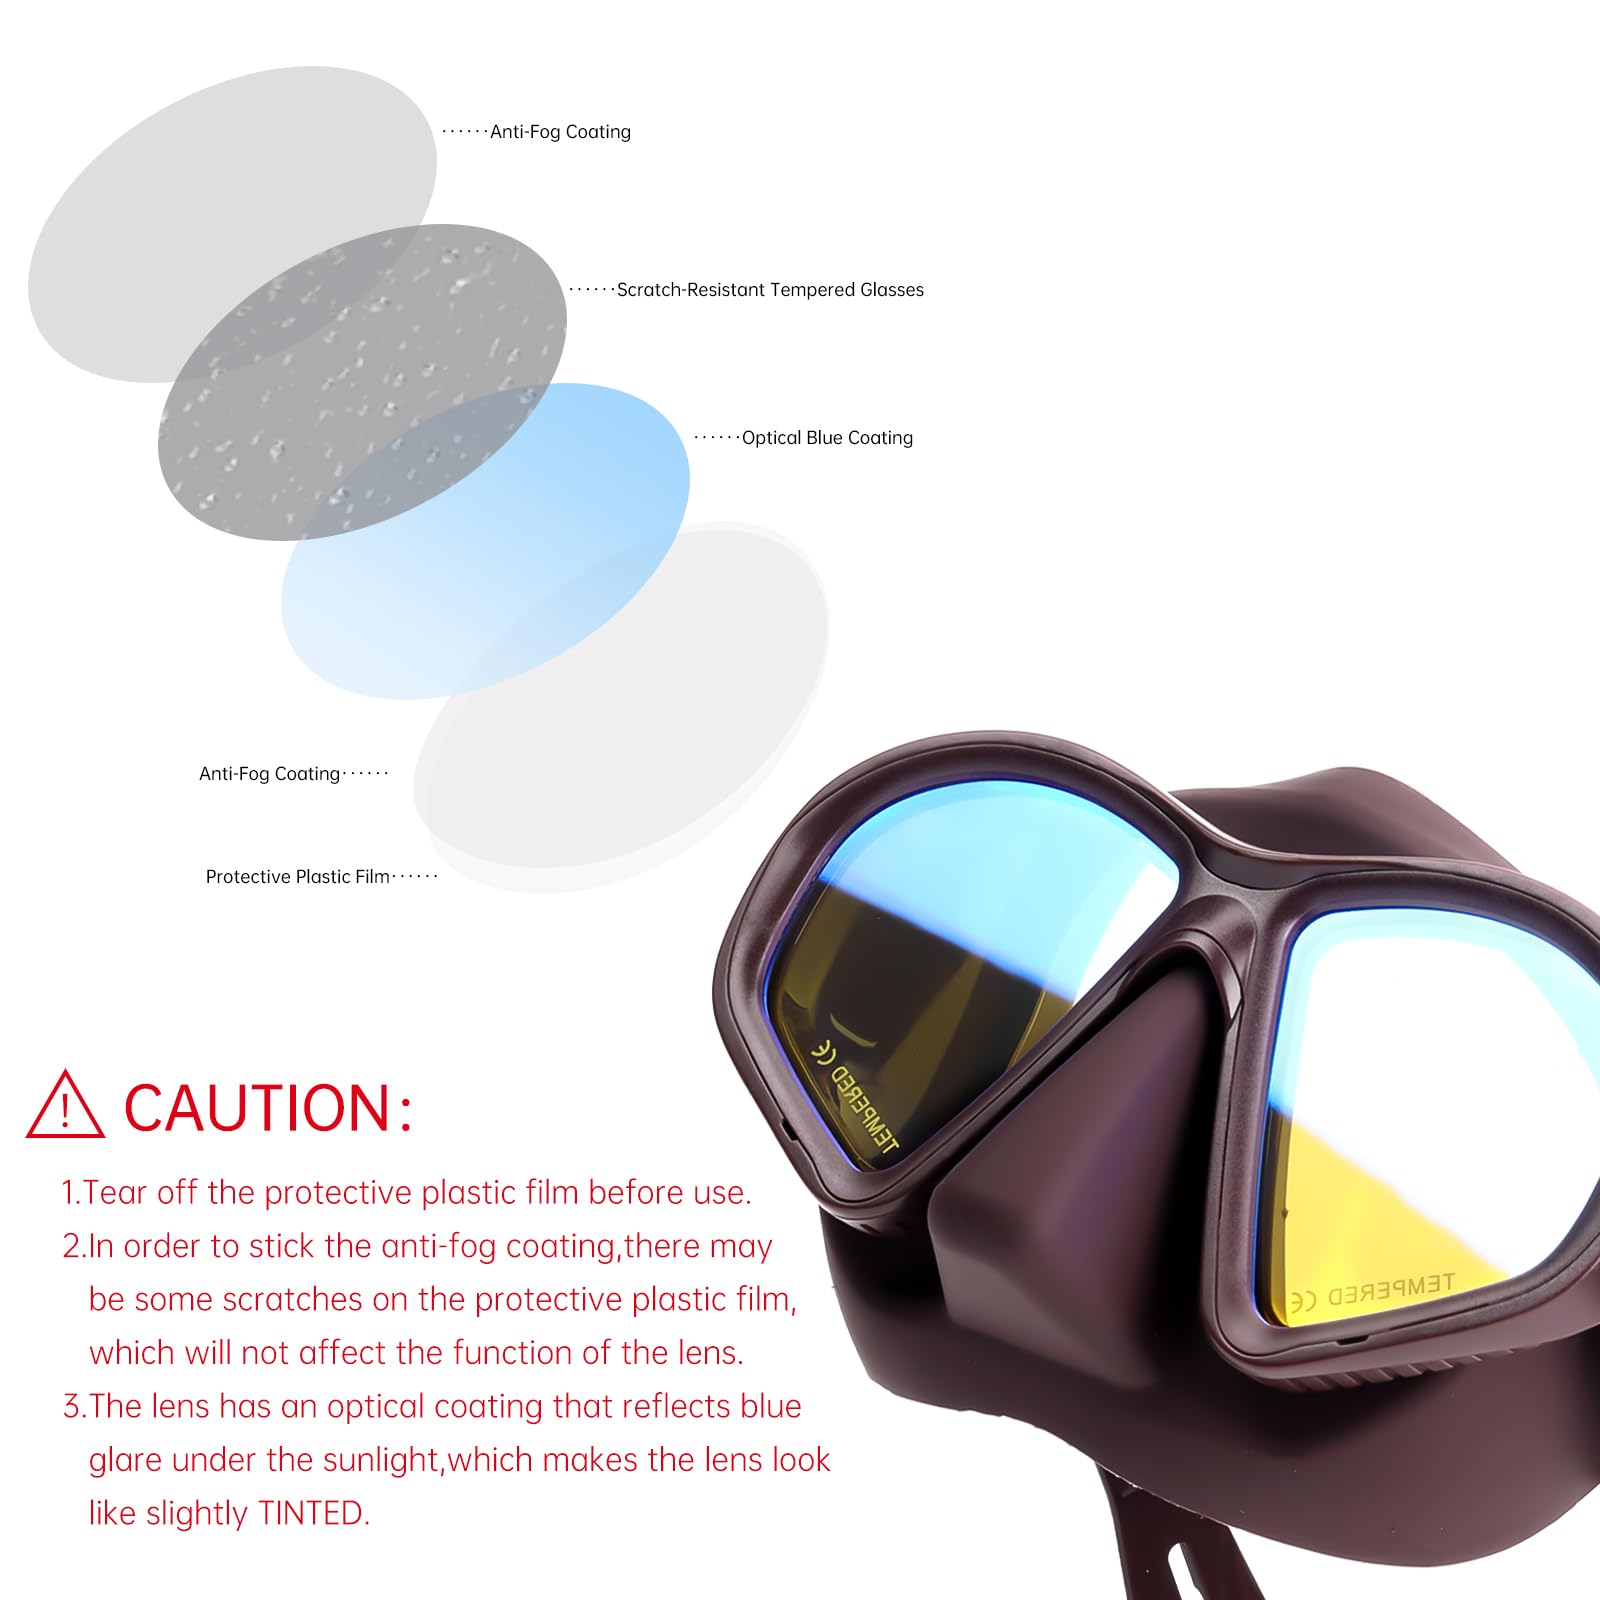 LUXPARD Diving Mask, Scuba Mask for Scuba Diving, Snorkeling, Free Diving, and Skin Diving. Anti-Fog Anti-Leak Low Volume Dive Mask with UV Coated Lenses, Scuba Gear for Adults